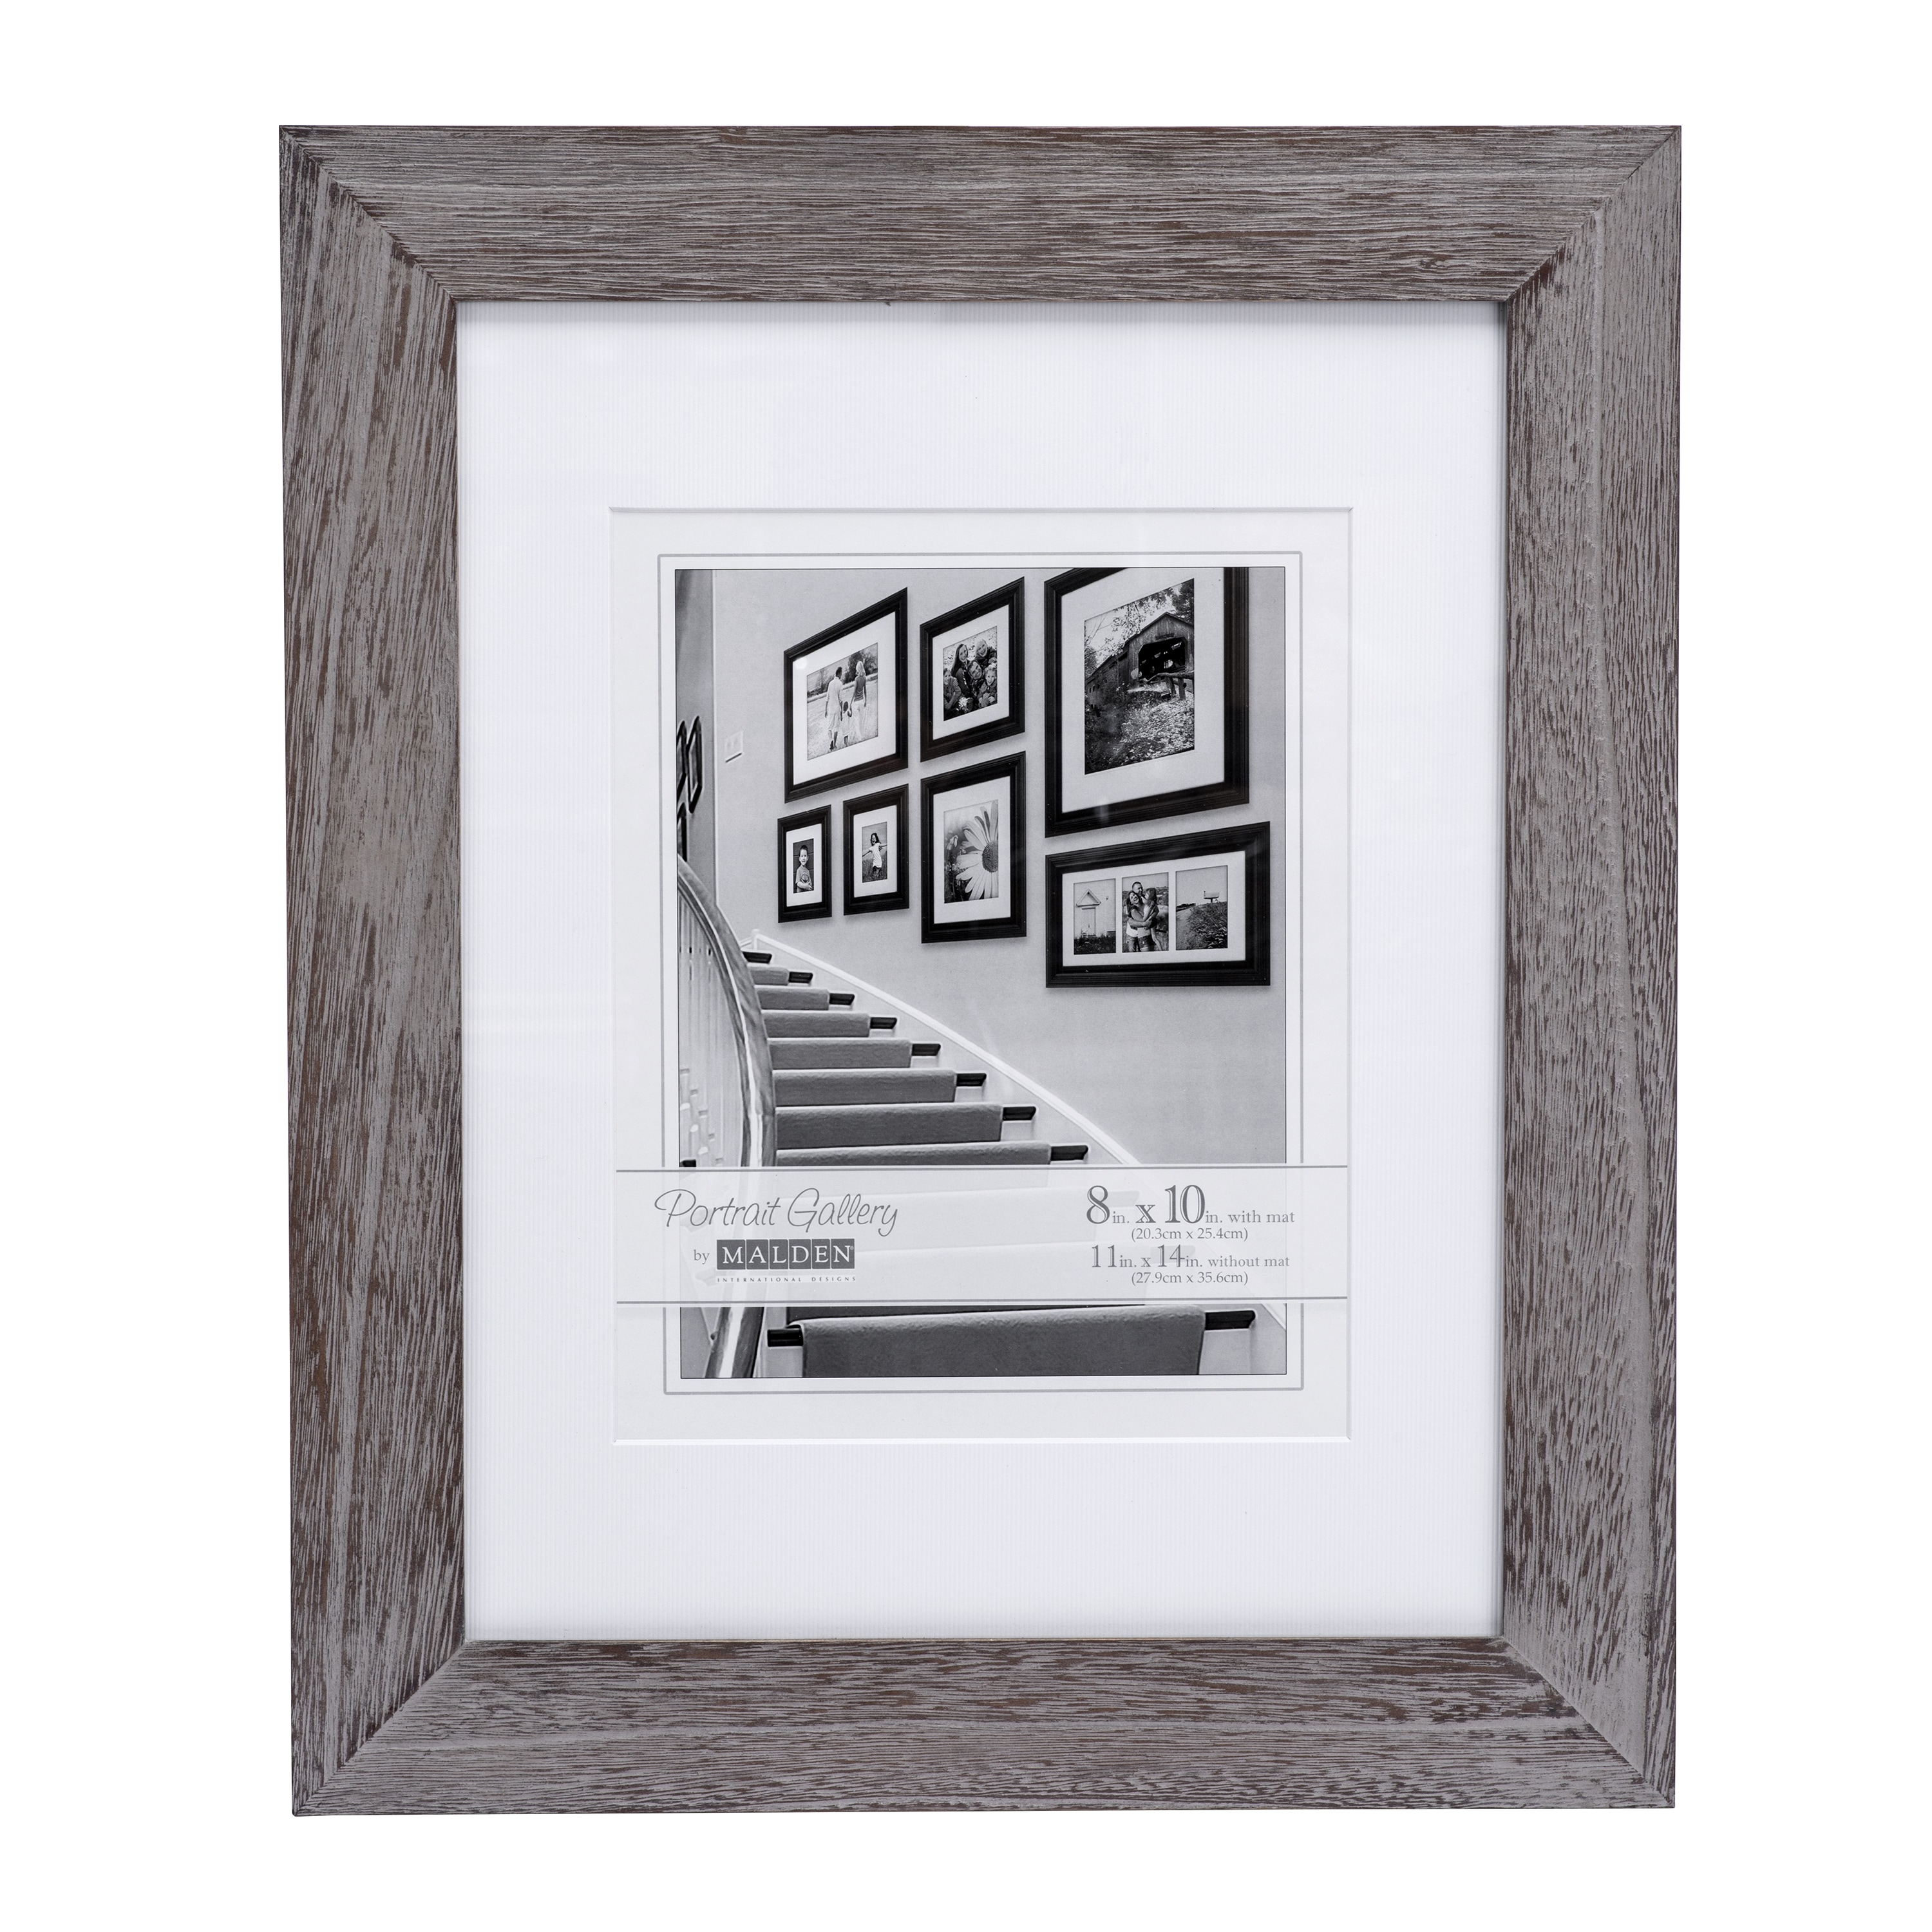 Gray MANHATTAN matted 8x10/5x7 frame by Malden Design® - Picture Frames,  Photo Albums, Personalized and Engraved Digital Photo Gifts - SendAFrame